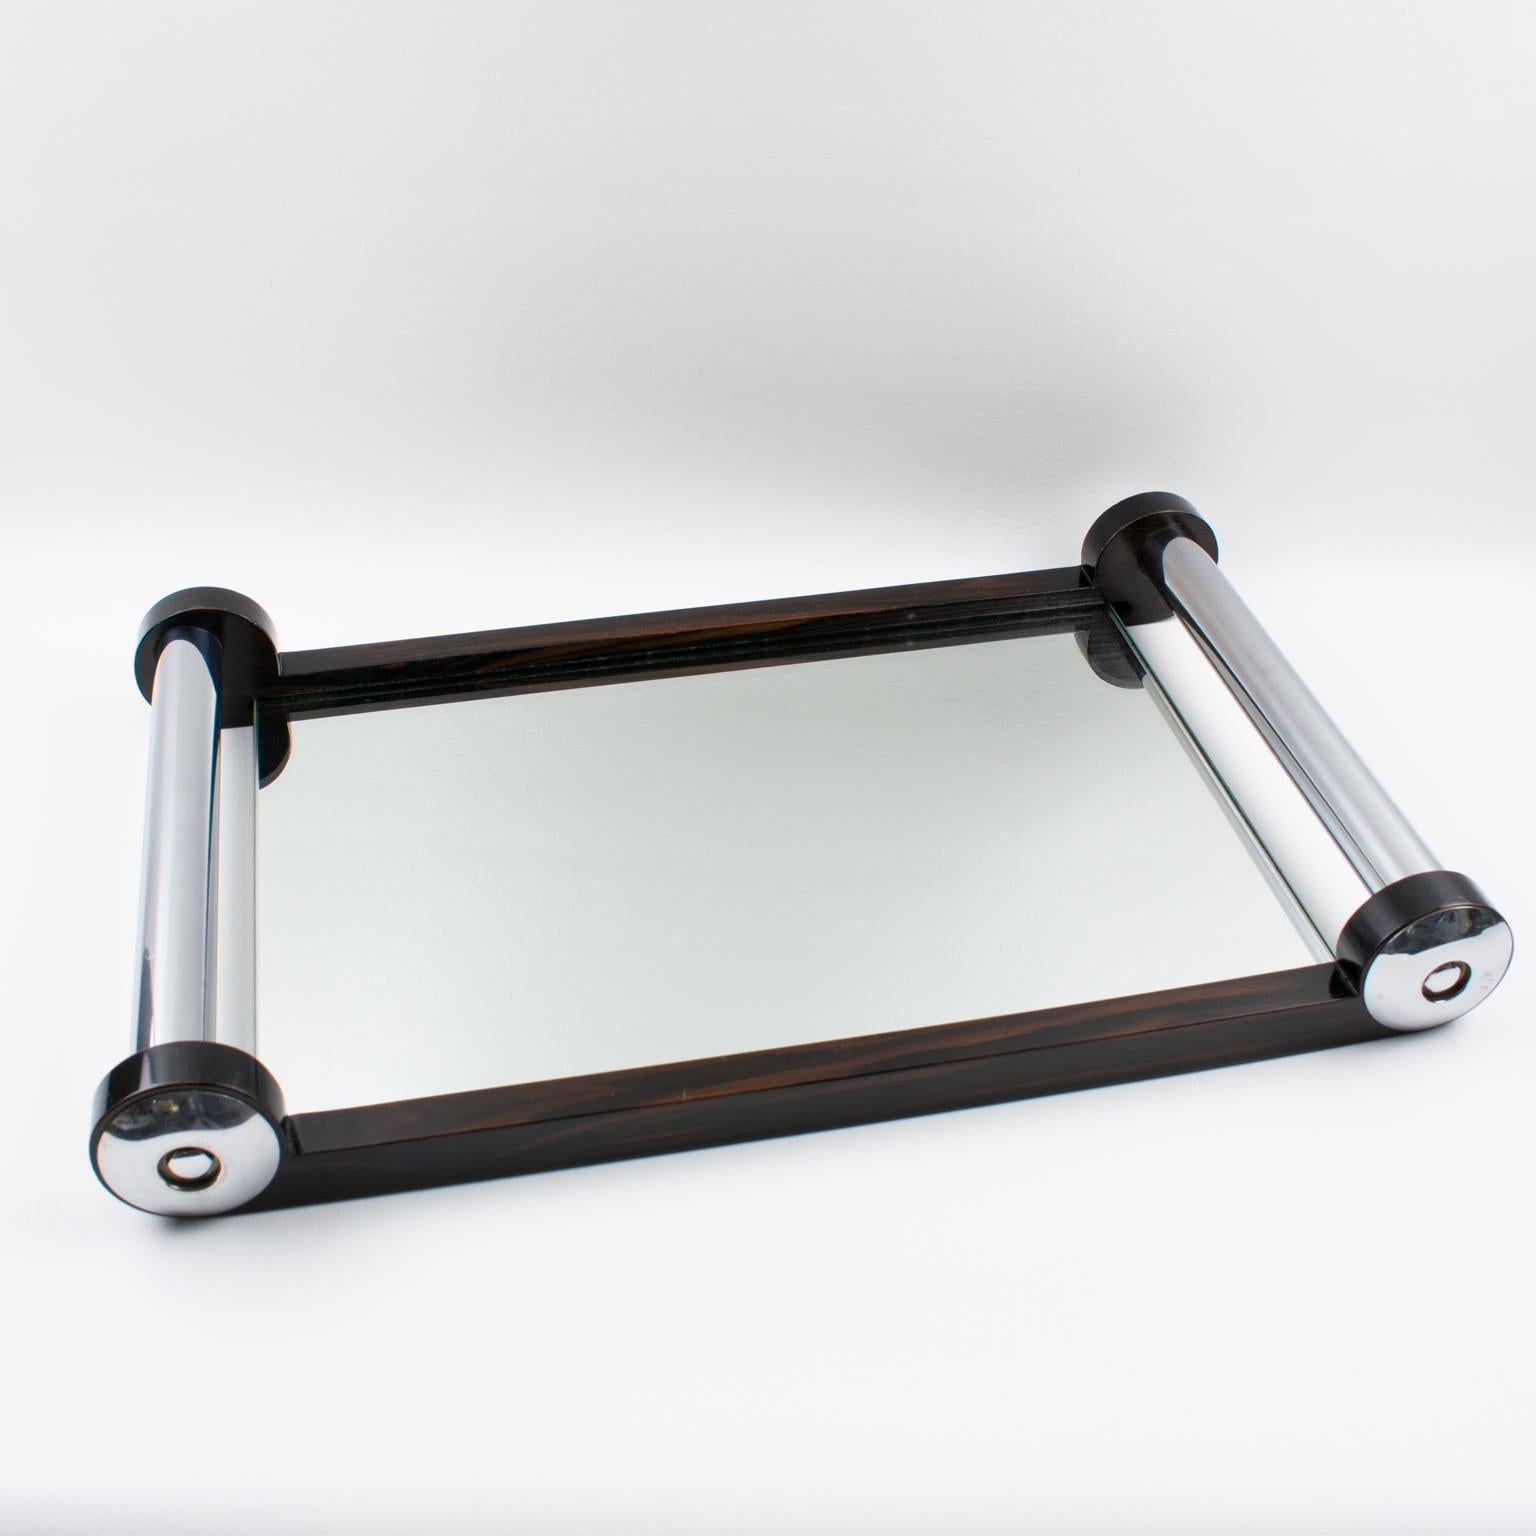 Large elegant French Art Deco barware serving tray. Chromed metal and Macassar wood rectangular gallery and extra thick handles. Insert base is in mirrored glass. Modernist design and geometric streamlined shape offer all the elegance one could